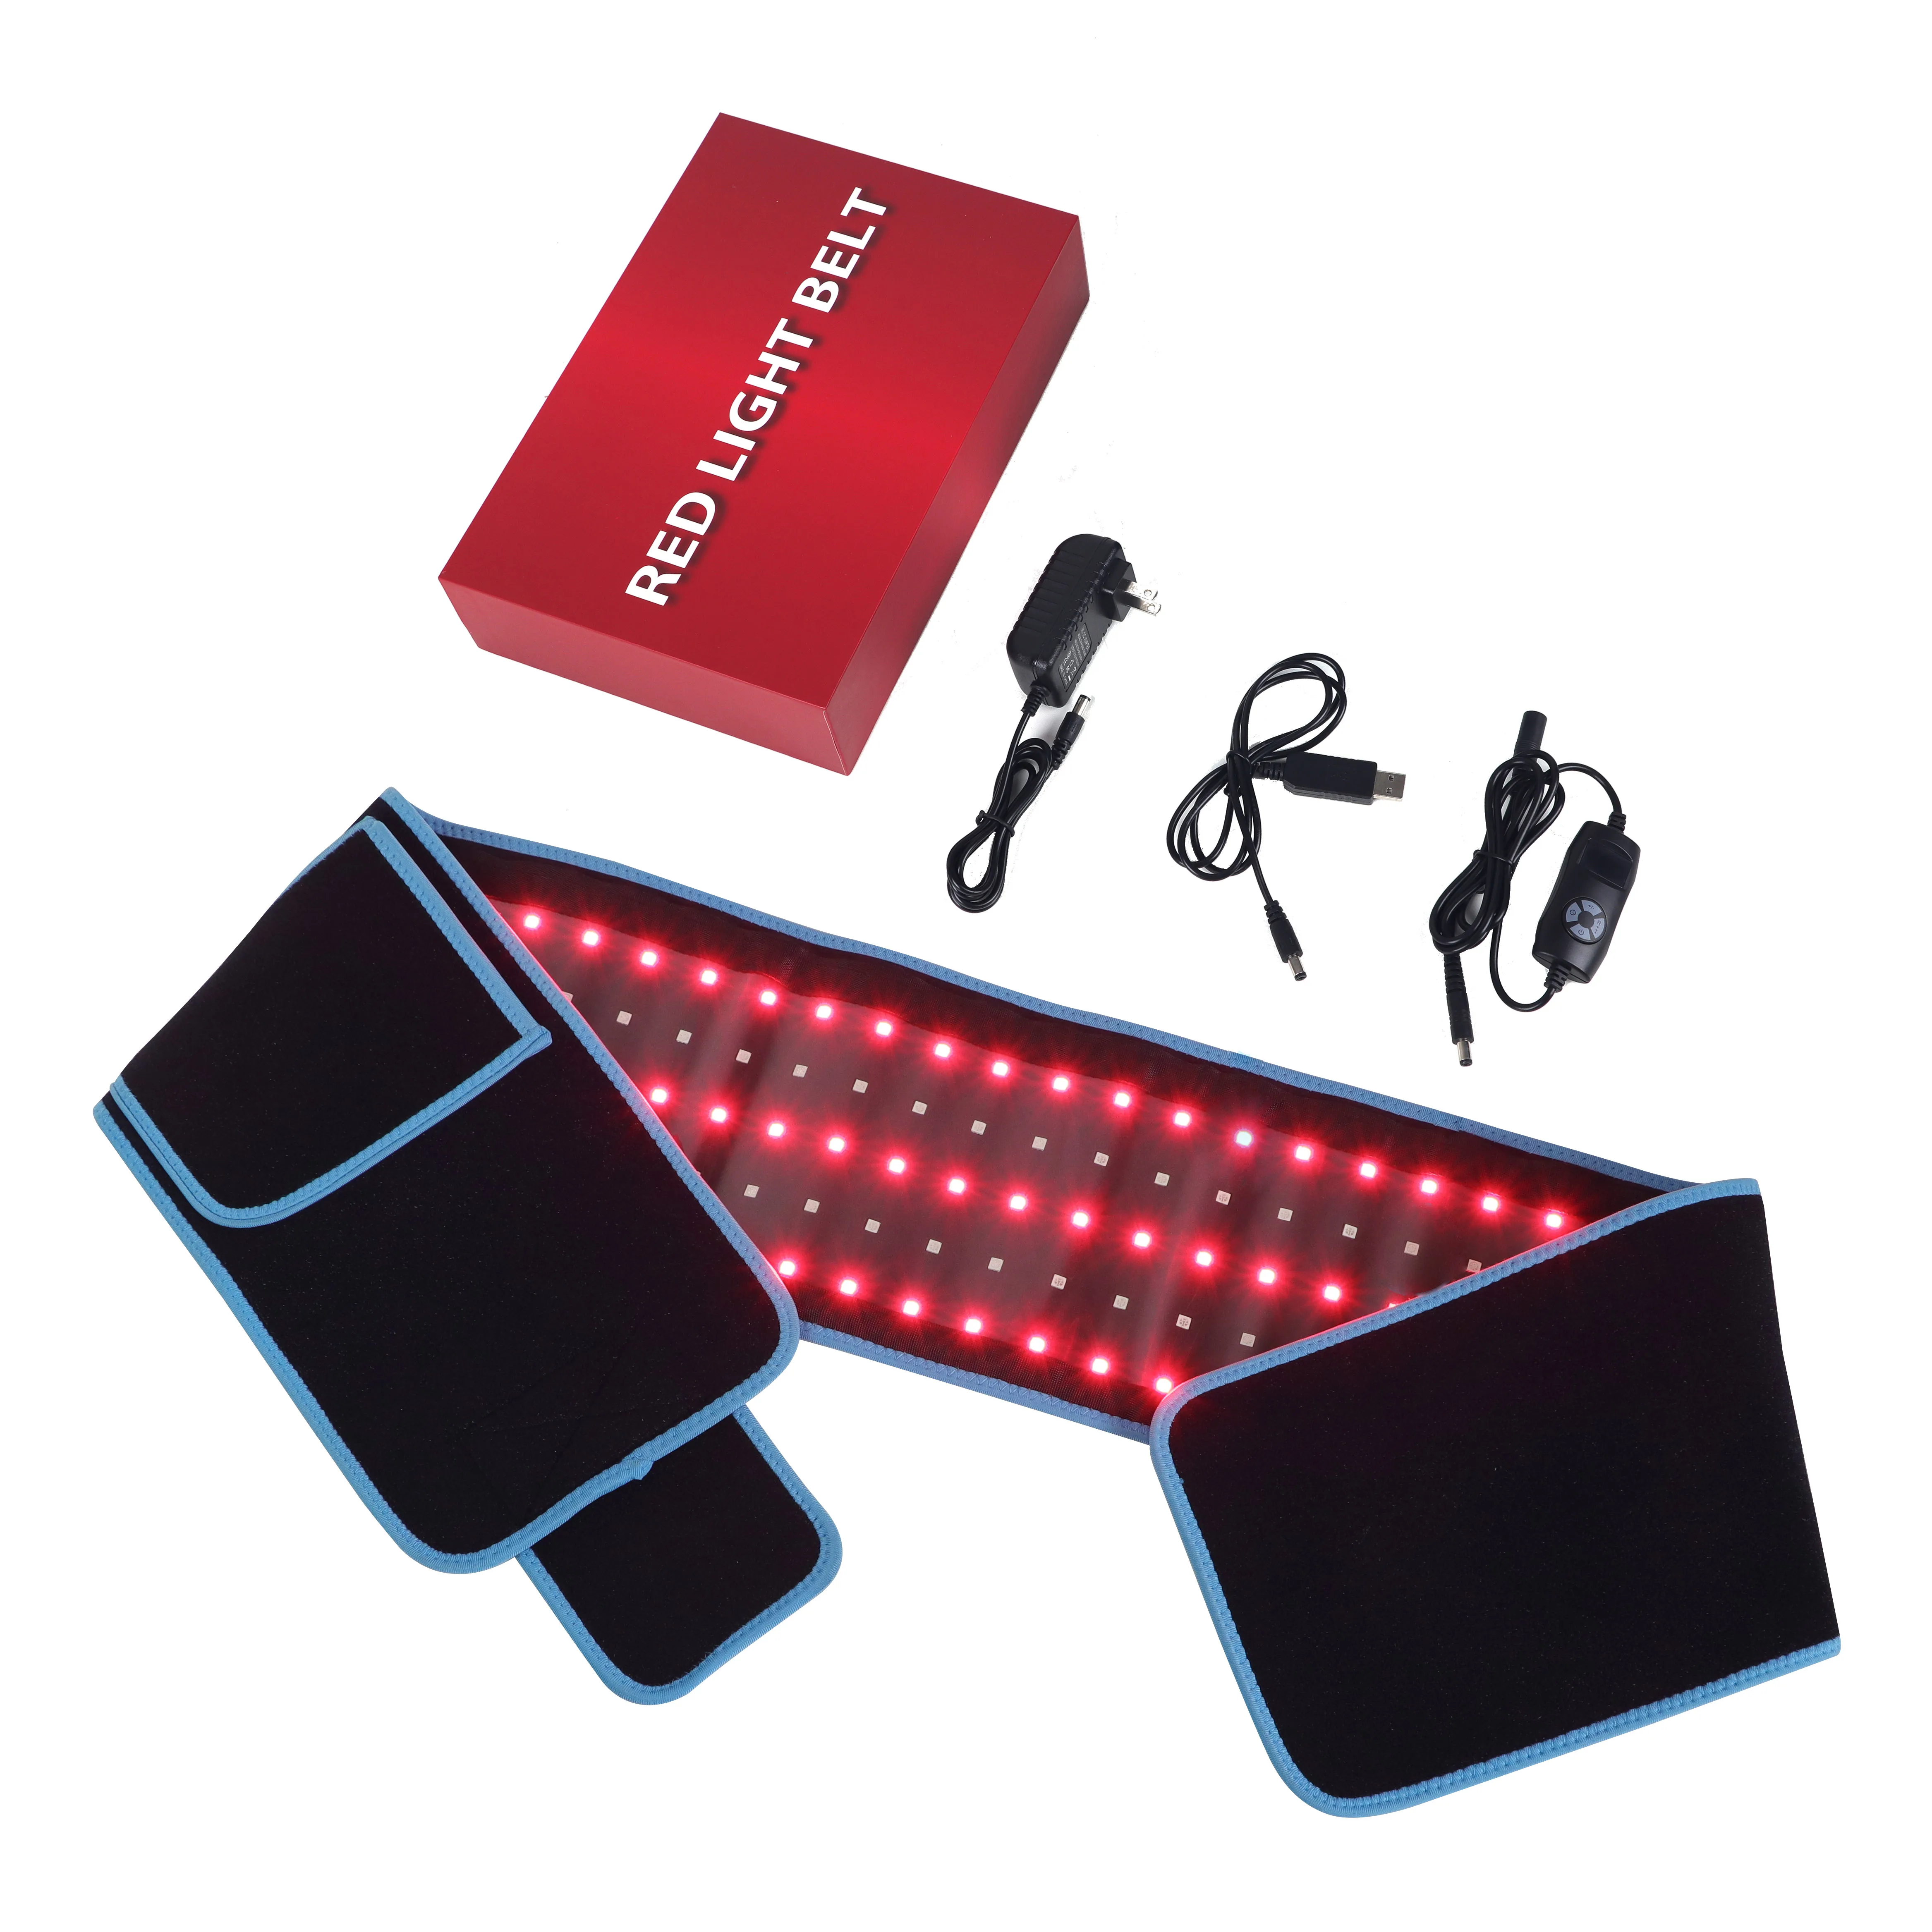 Phototherapy Wrap 850nm Near Infrared Light Therapy Belt and 635nm LED Red light therapy Pad for Pain Relief Health Care Device